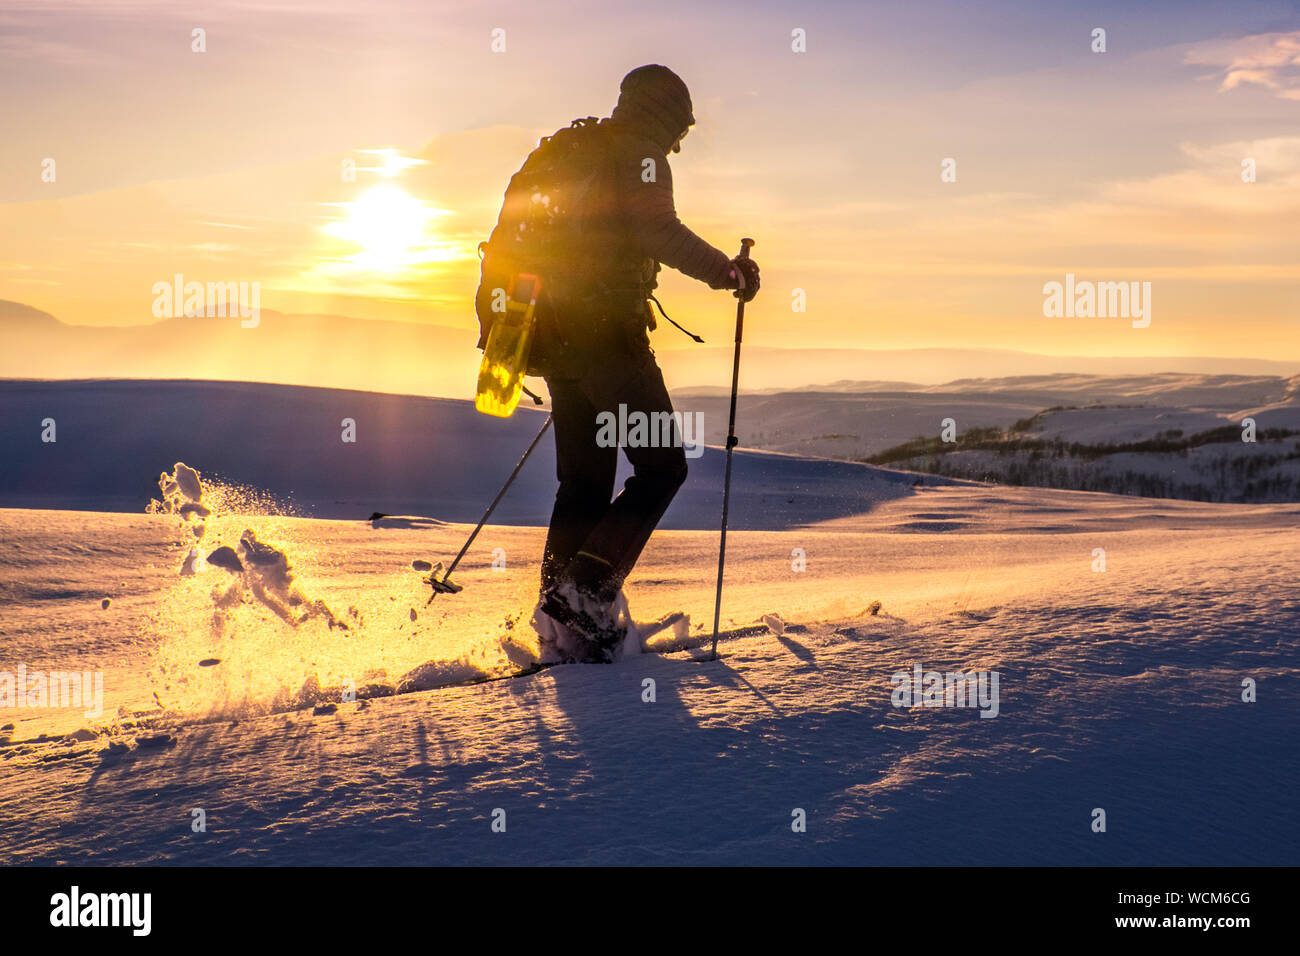 Ski tourer / cross country skier / back country skier silhouetted against the setting sun in the mountains of Norway Stock Photo